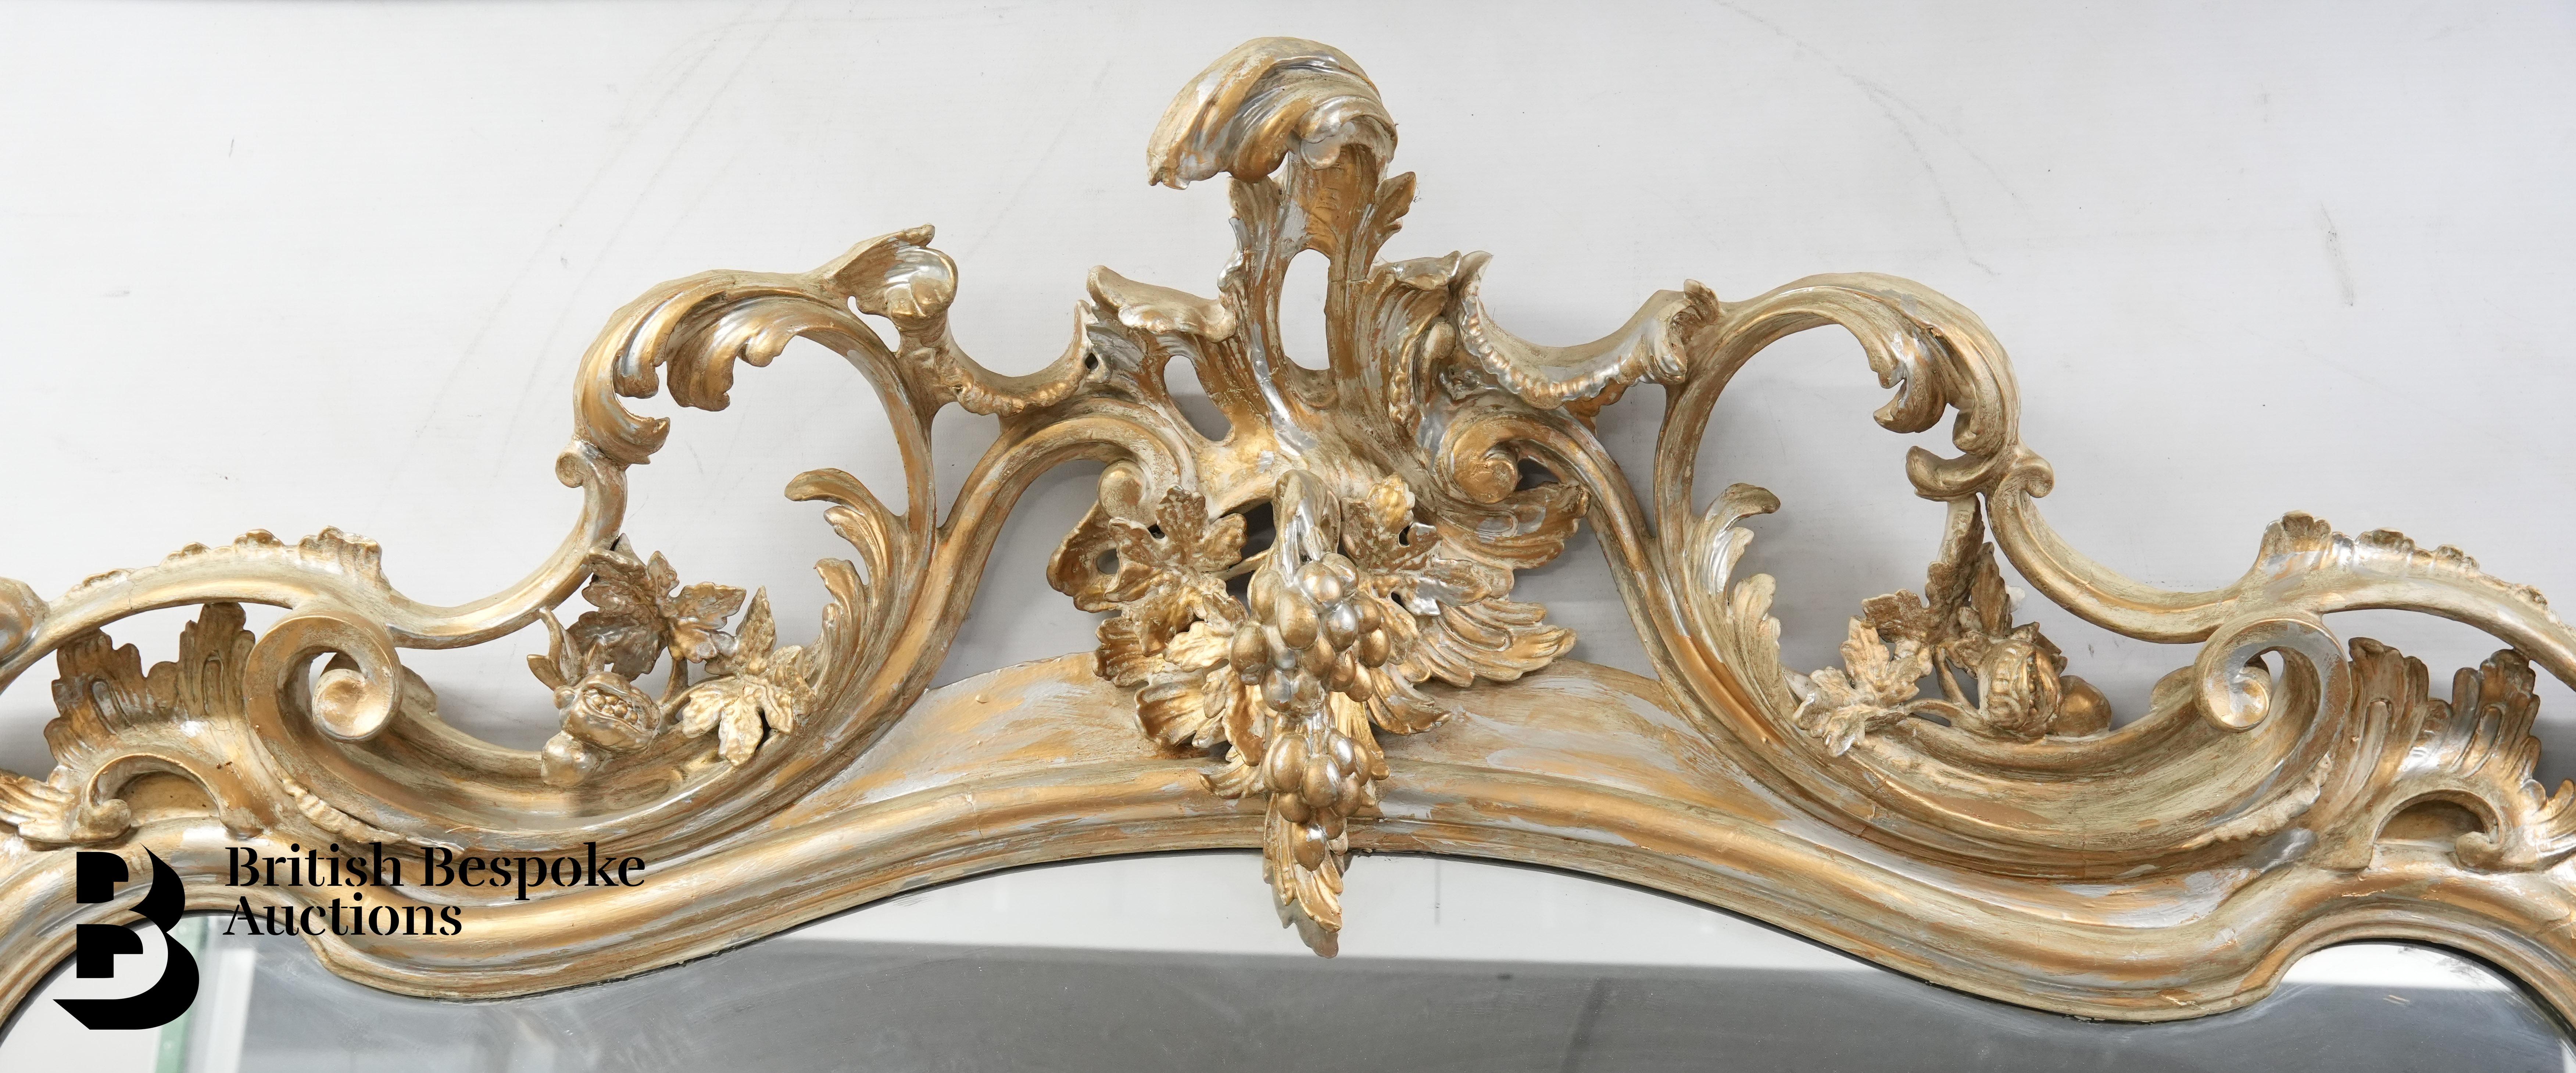 Substantial 20th Century Gilt Mirror - Image 2 of 9